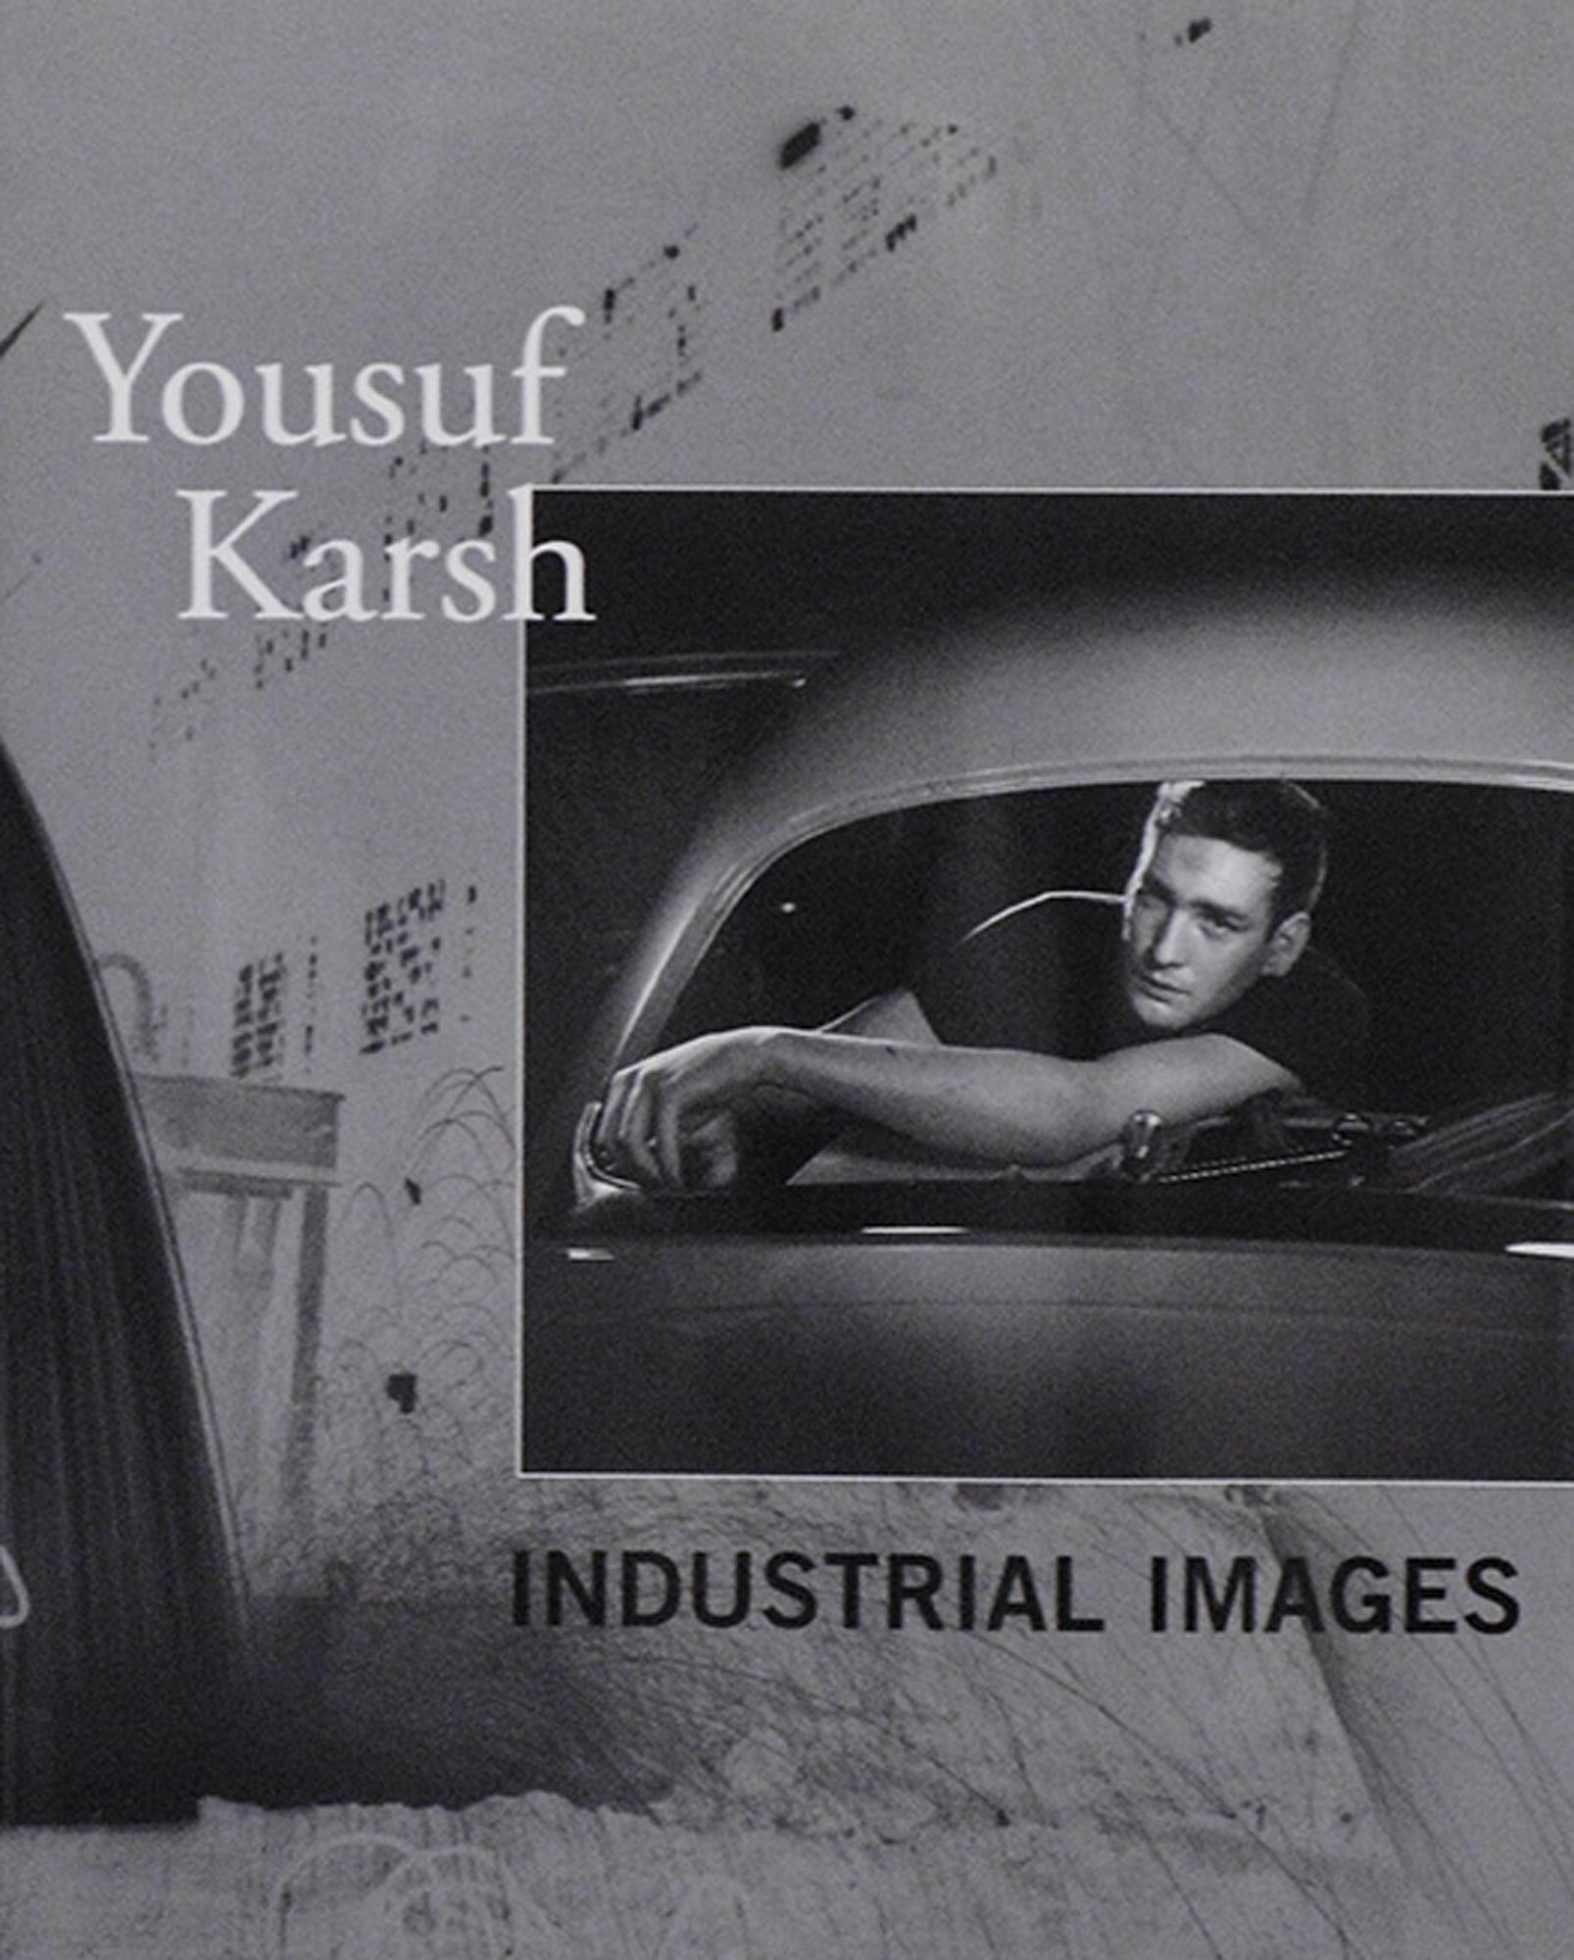 Yousuf Karsh: Industrial Images